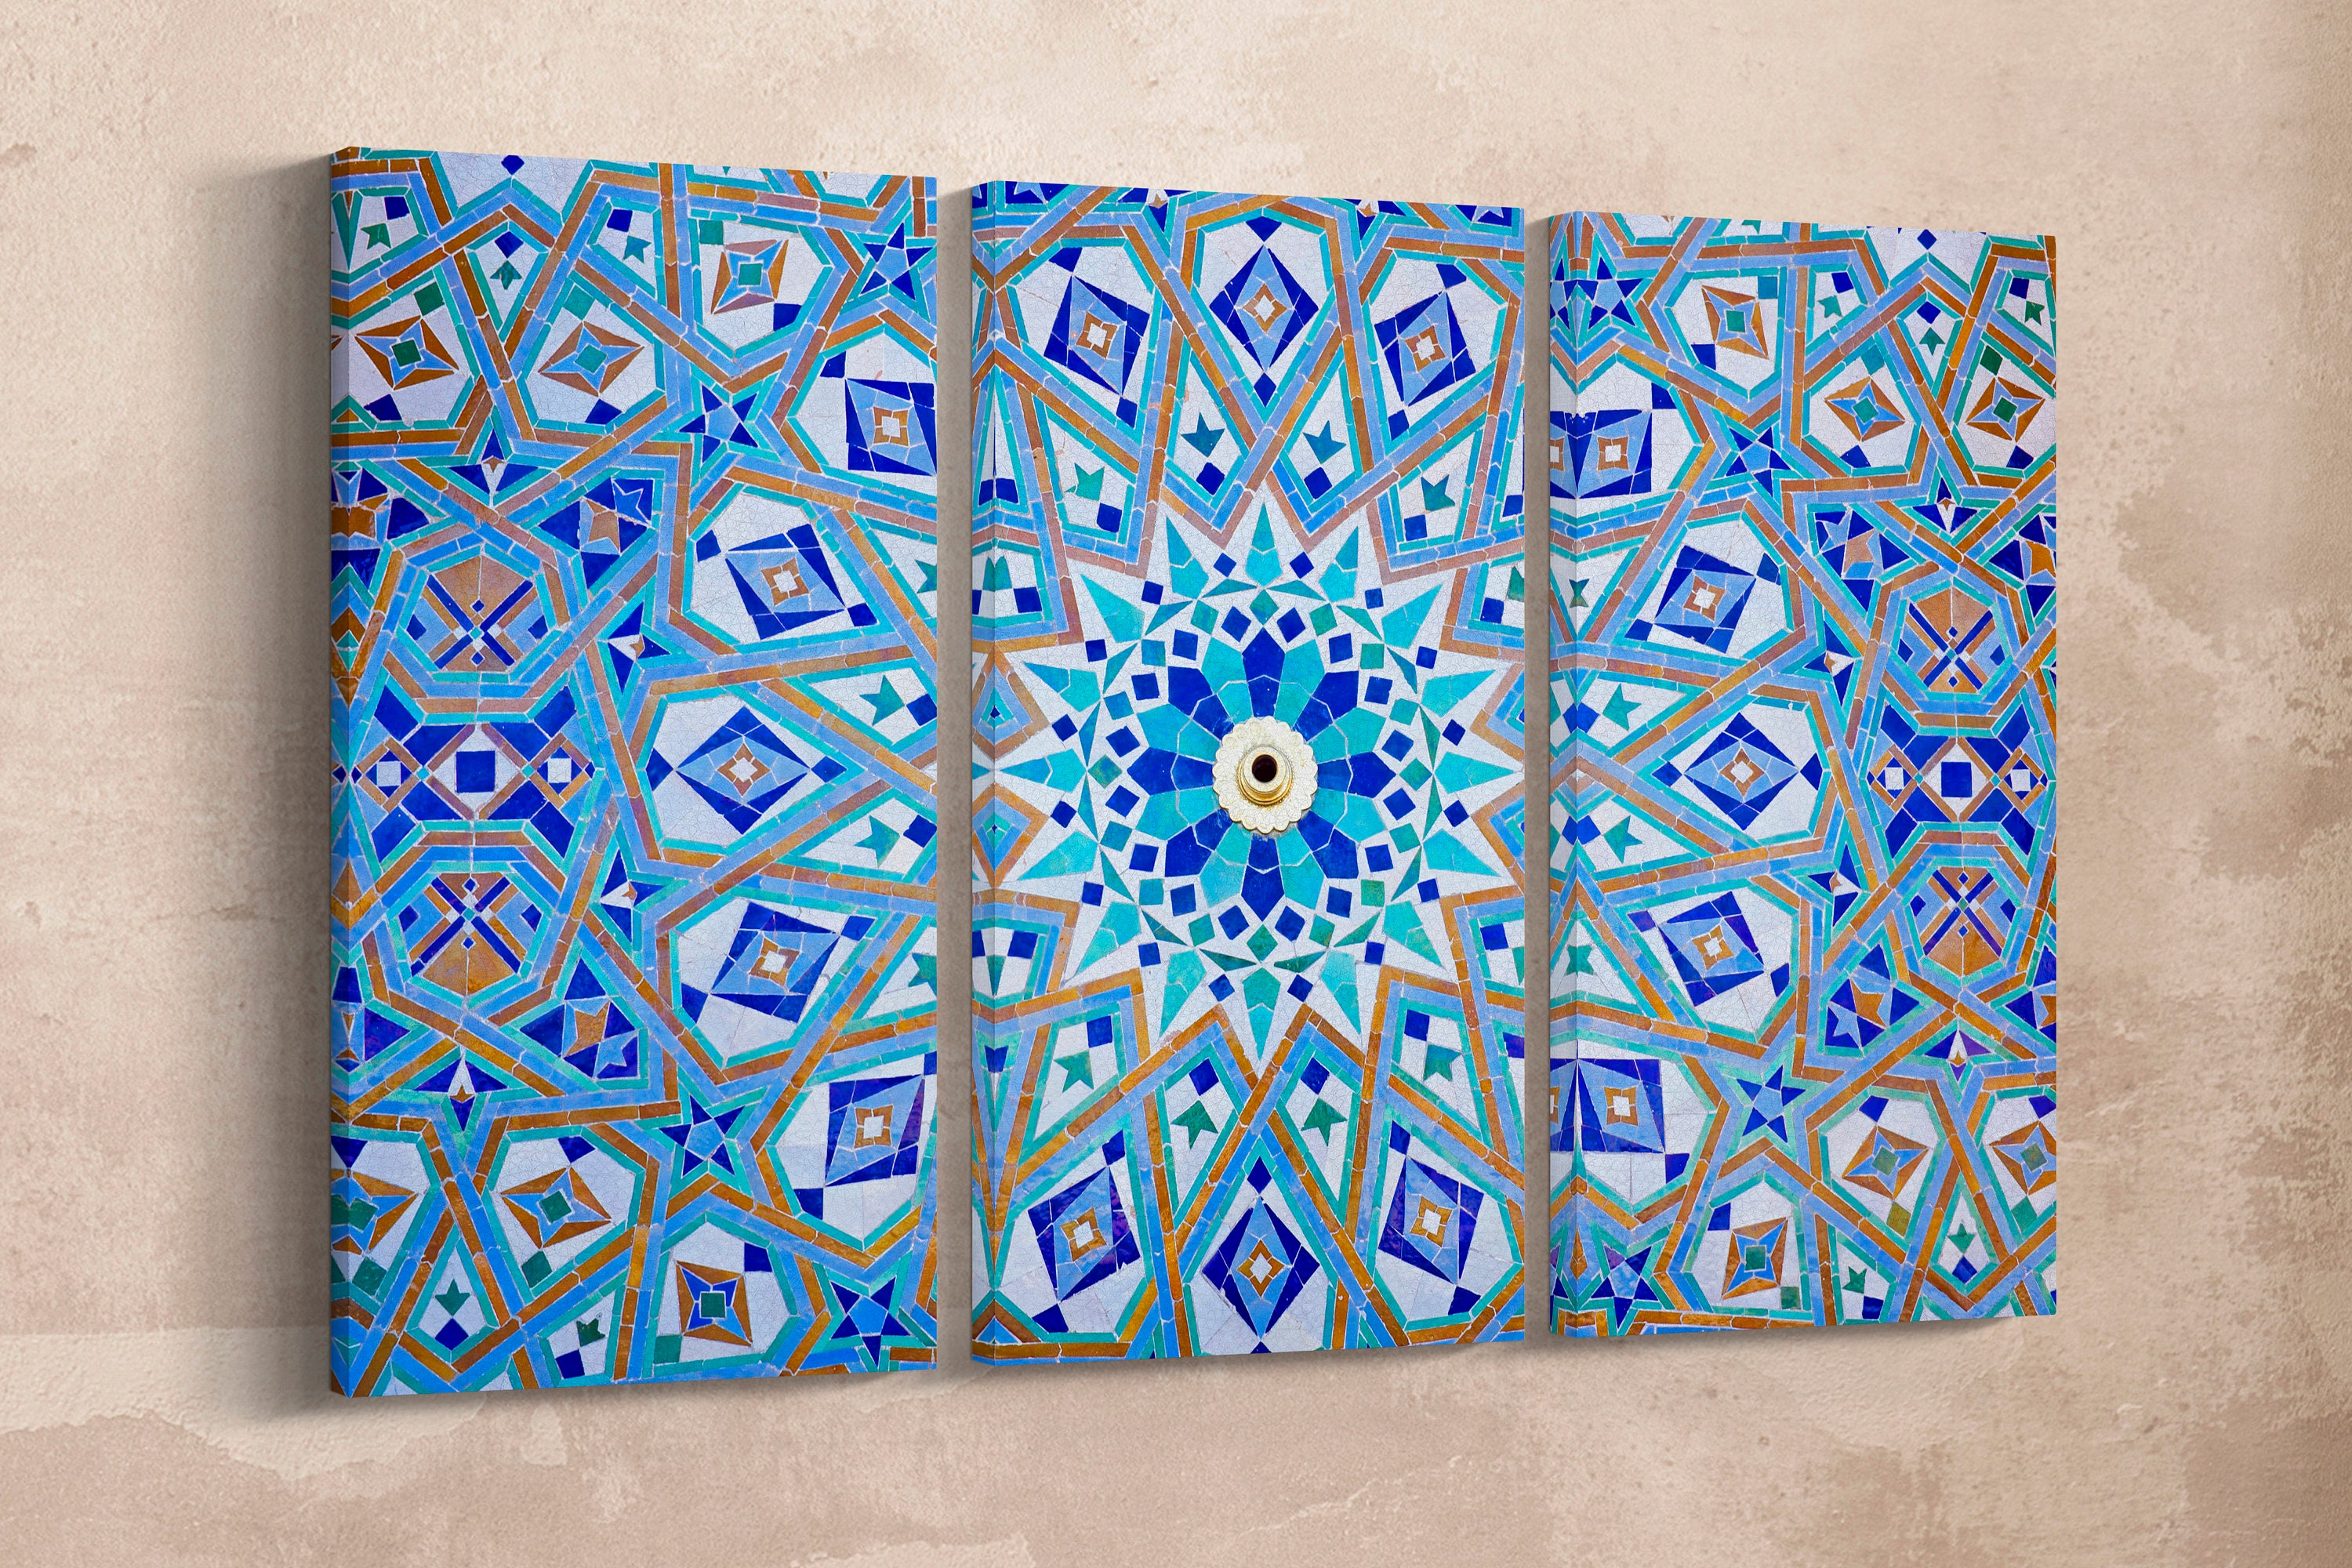 Italy/better Wall Oriental Wall Print/geometric Etsy Wall Mosaic Art/multi - in Print/large Art/morocco/large Canvas Than Decor/made Leather Panel